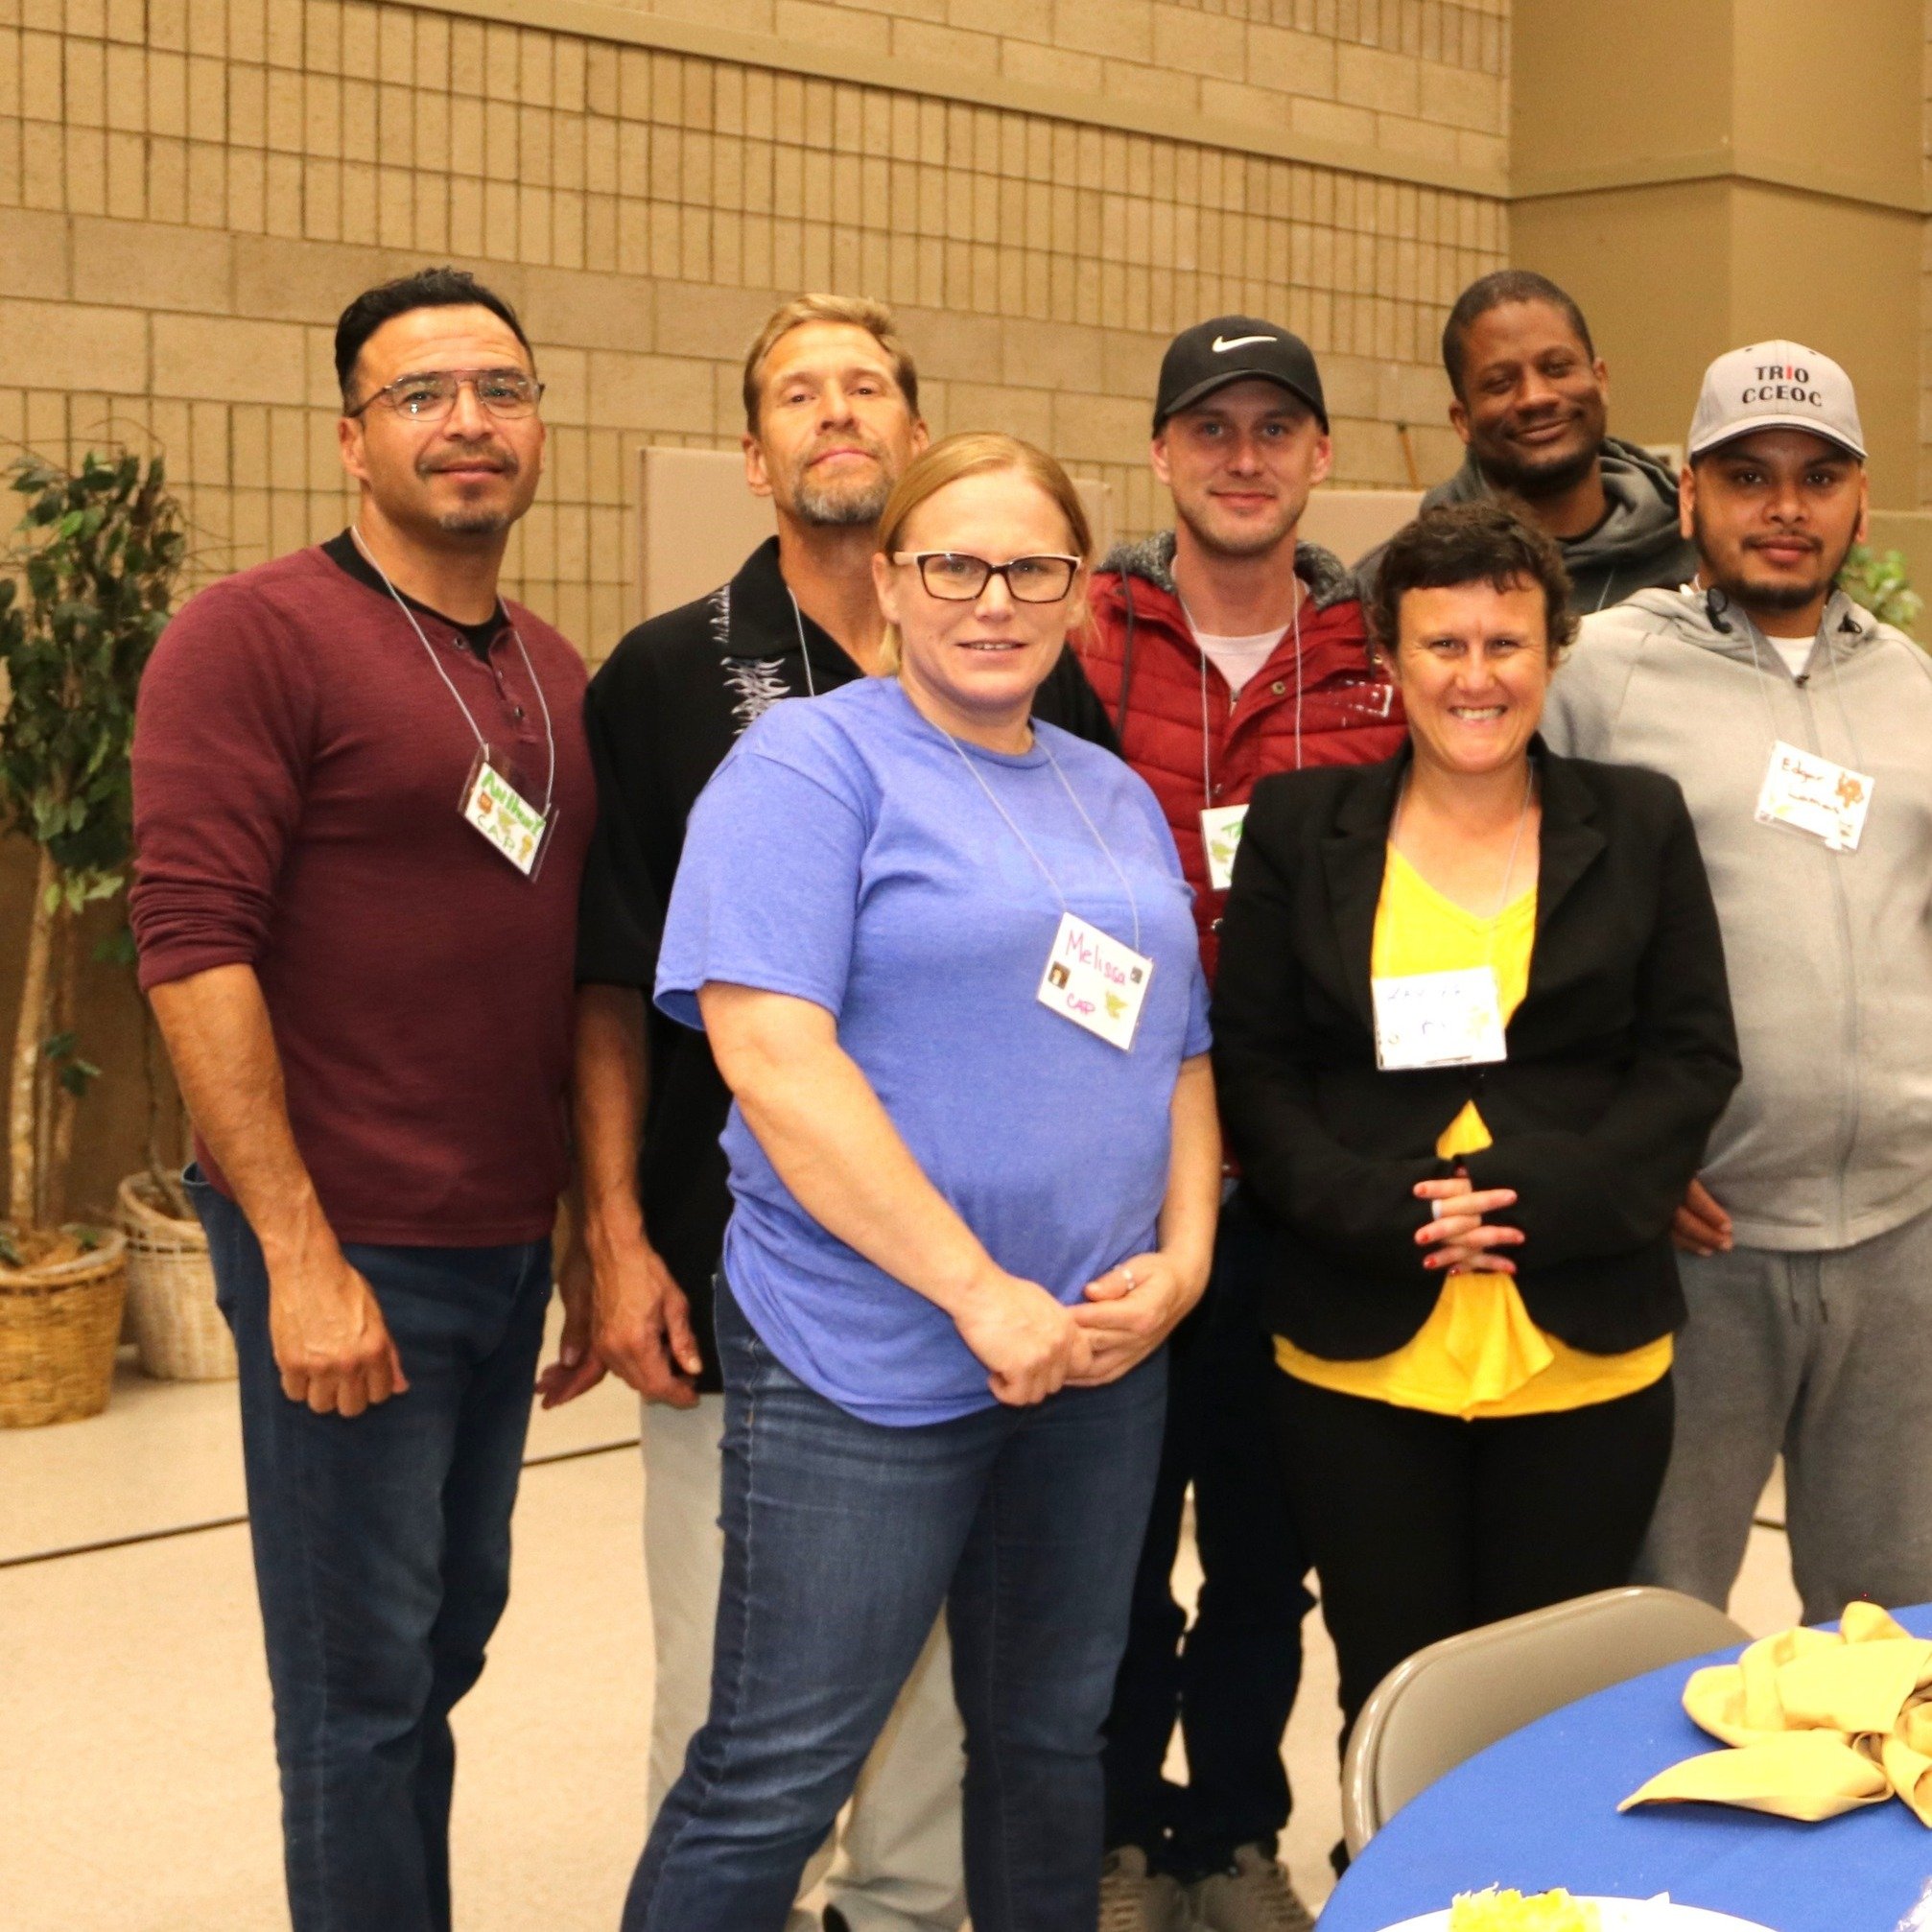 Each week, individuals in our program venture into the community to experience sober fun. This reward is earned for attending the most groups and exceeding expecations in the program. Last week, we attended the 9th Annual Central California AA Counci